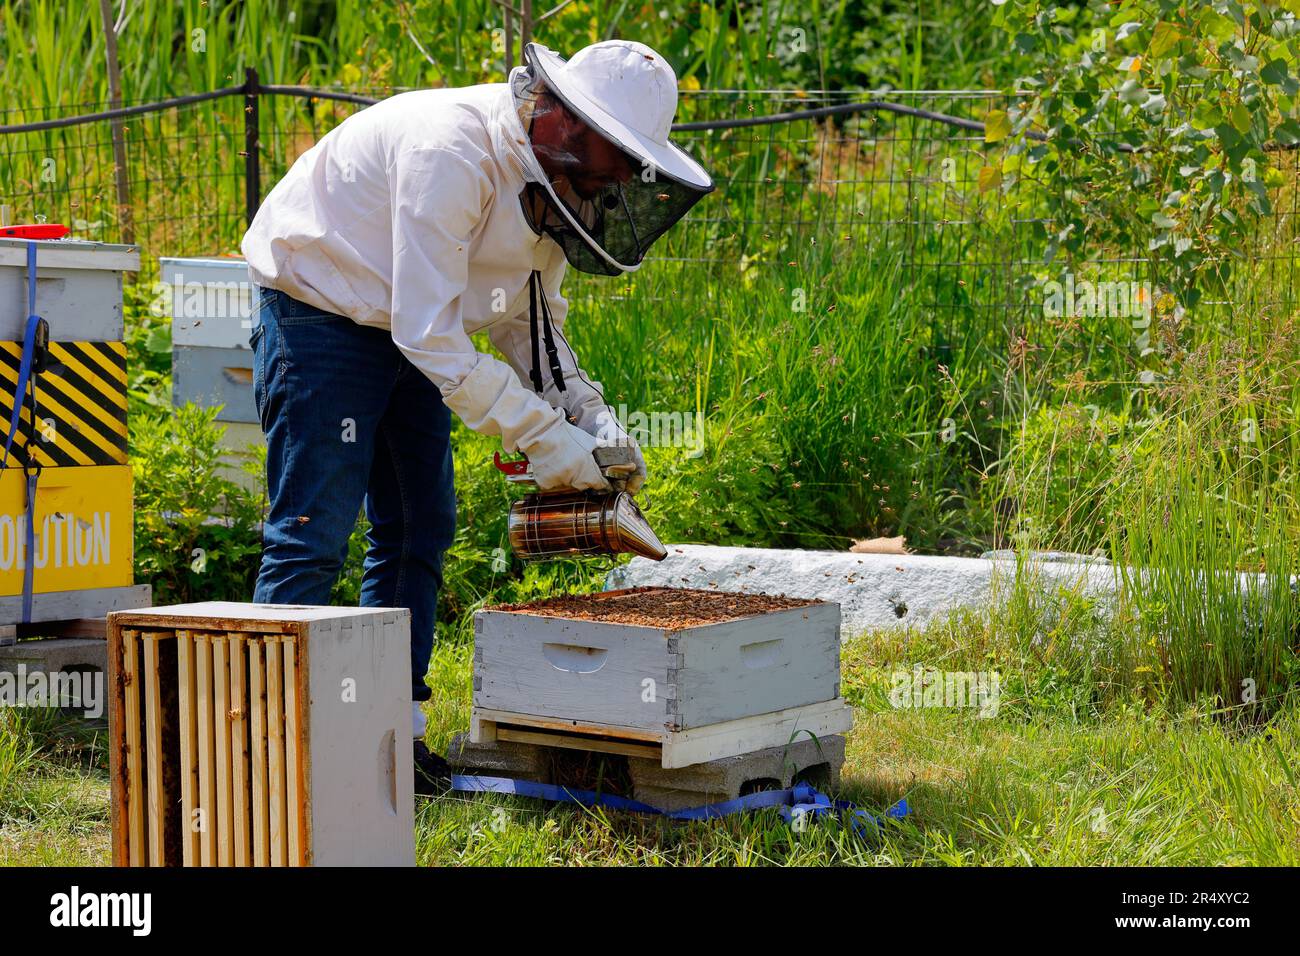 A beekeeper applies smoke to calm a hive of honey bees at the Bee Conservancy, Governors Island, New York. Stock Photo